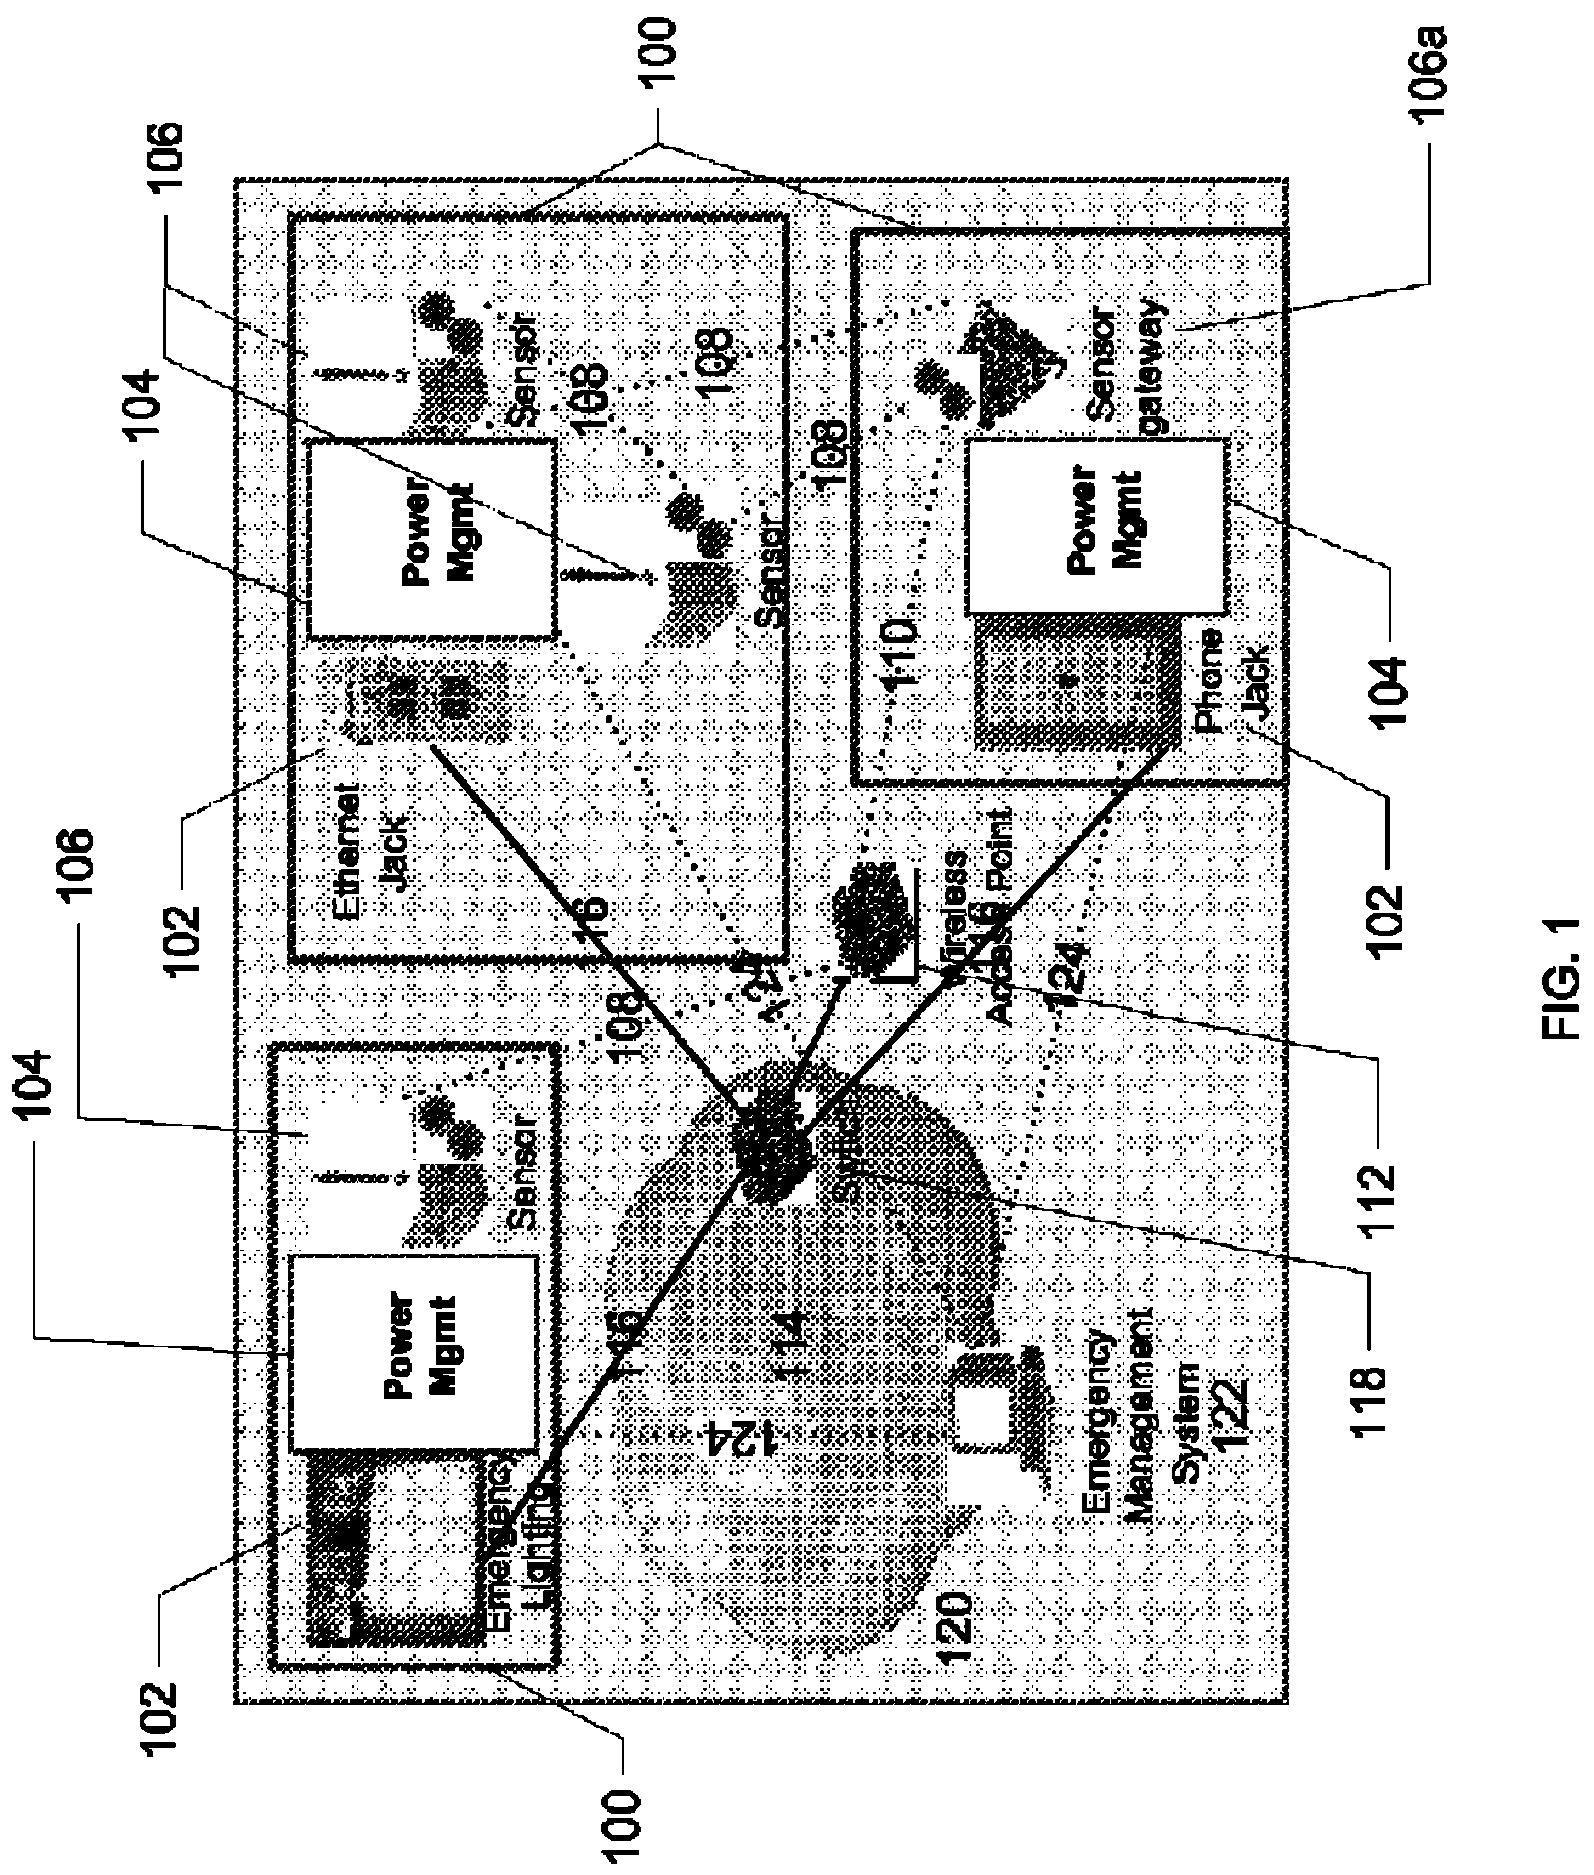 System and method for providing power management in a sensor network